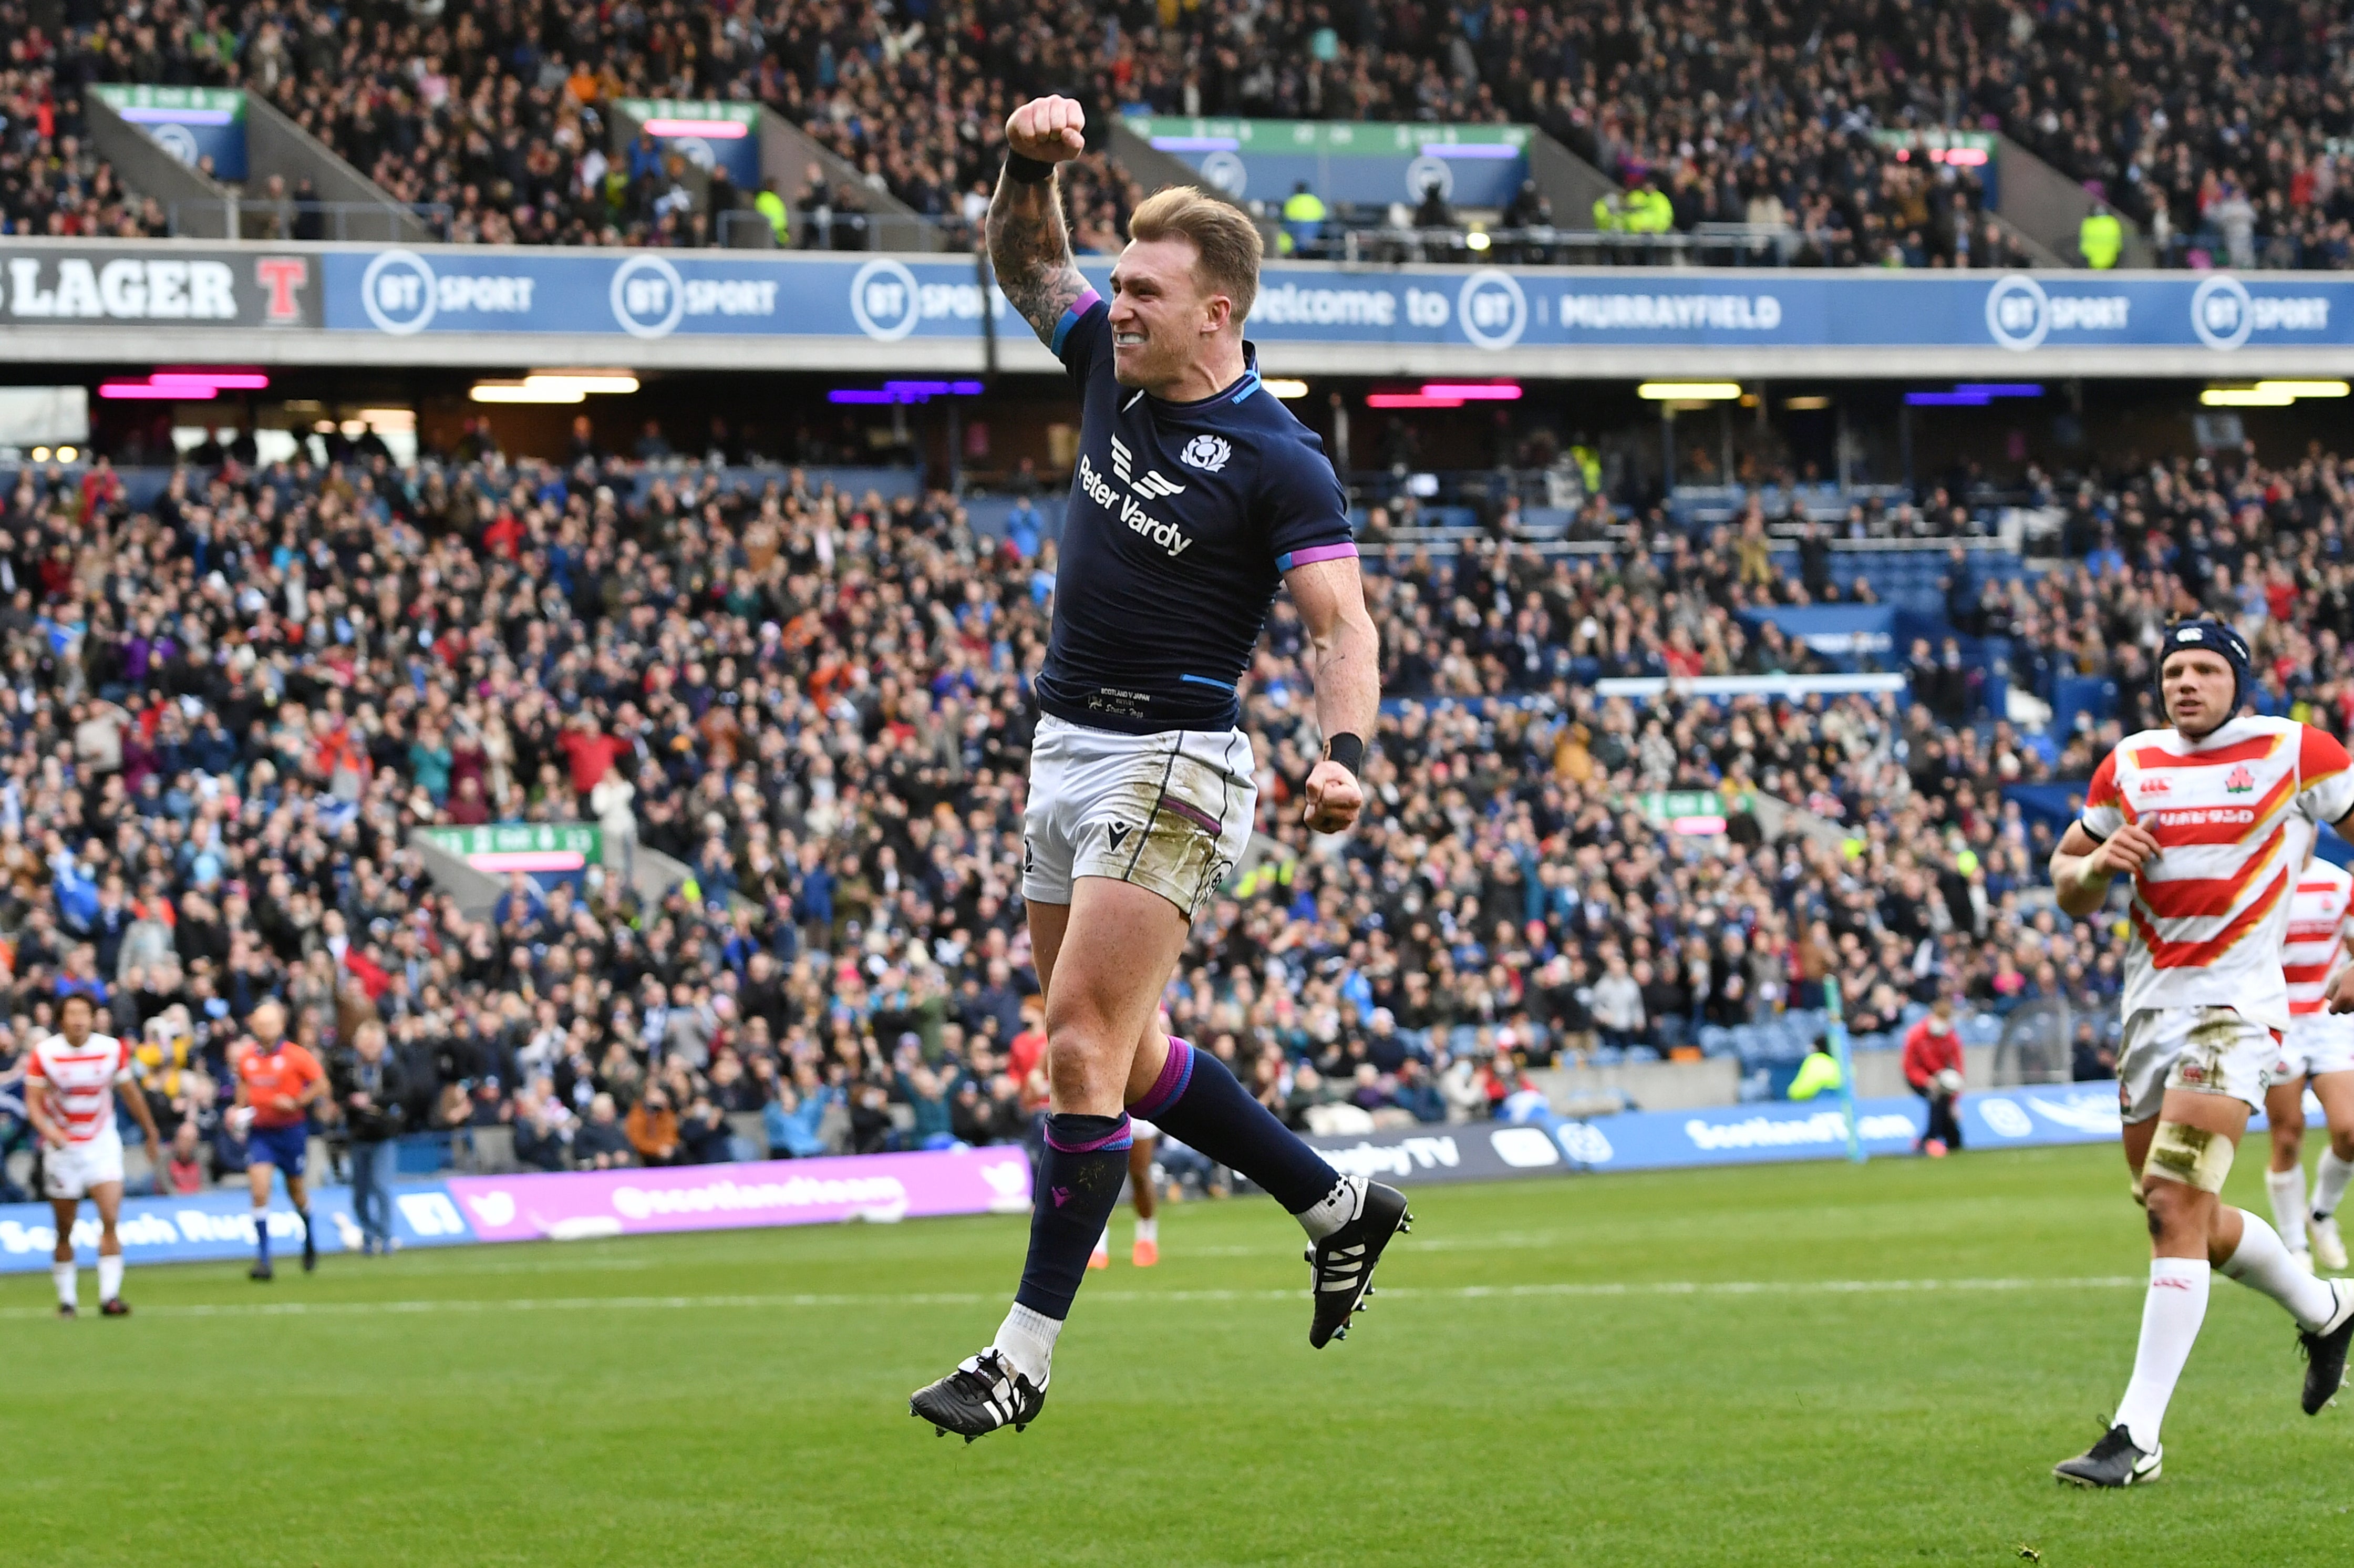 Fans will be able to watch Scotland’s Six Nations games at Murrayfield, after Nicola Sturgeon announced the limit on crowds at outdoor events is being lifted from January 17 (Malcolm Mackenzie/PA)